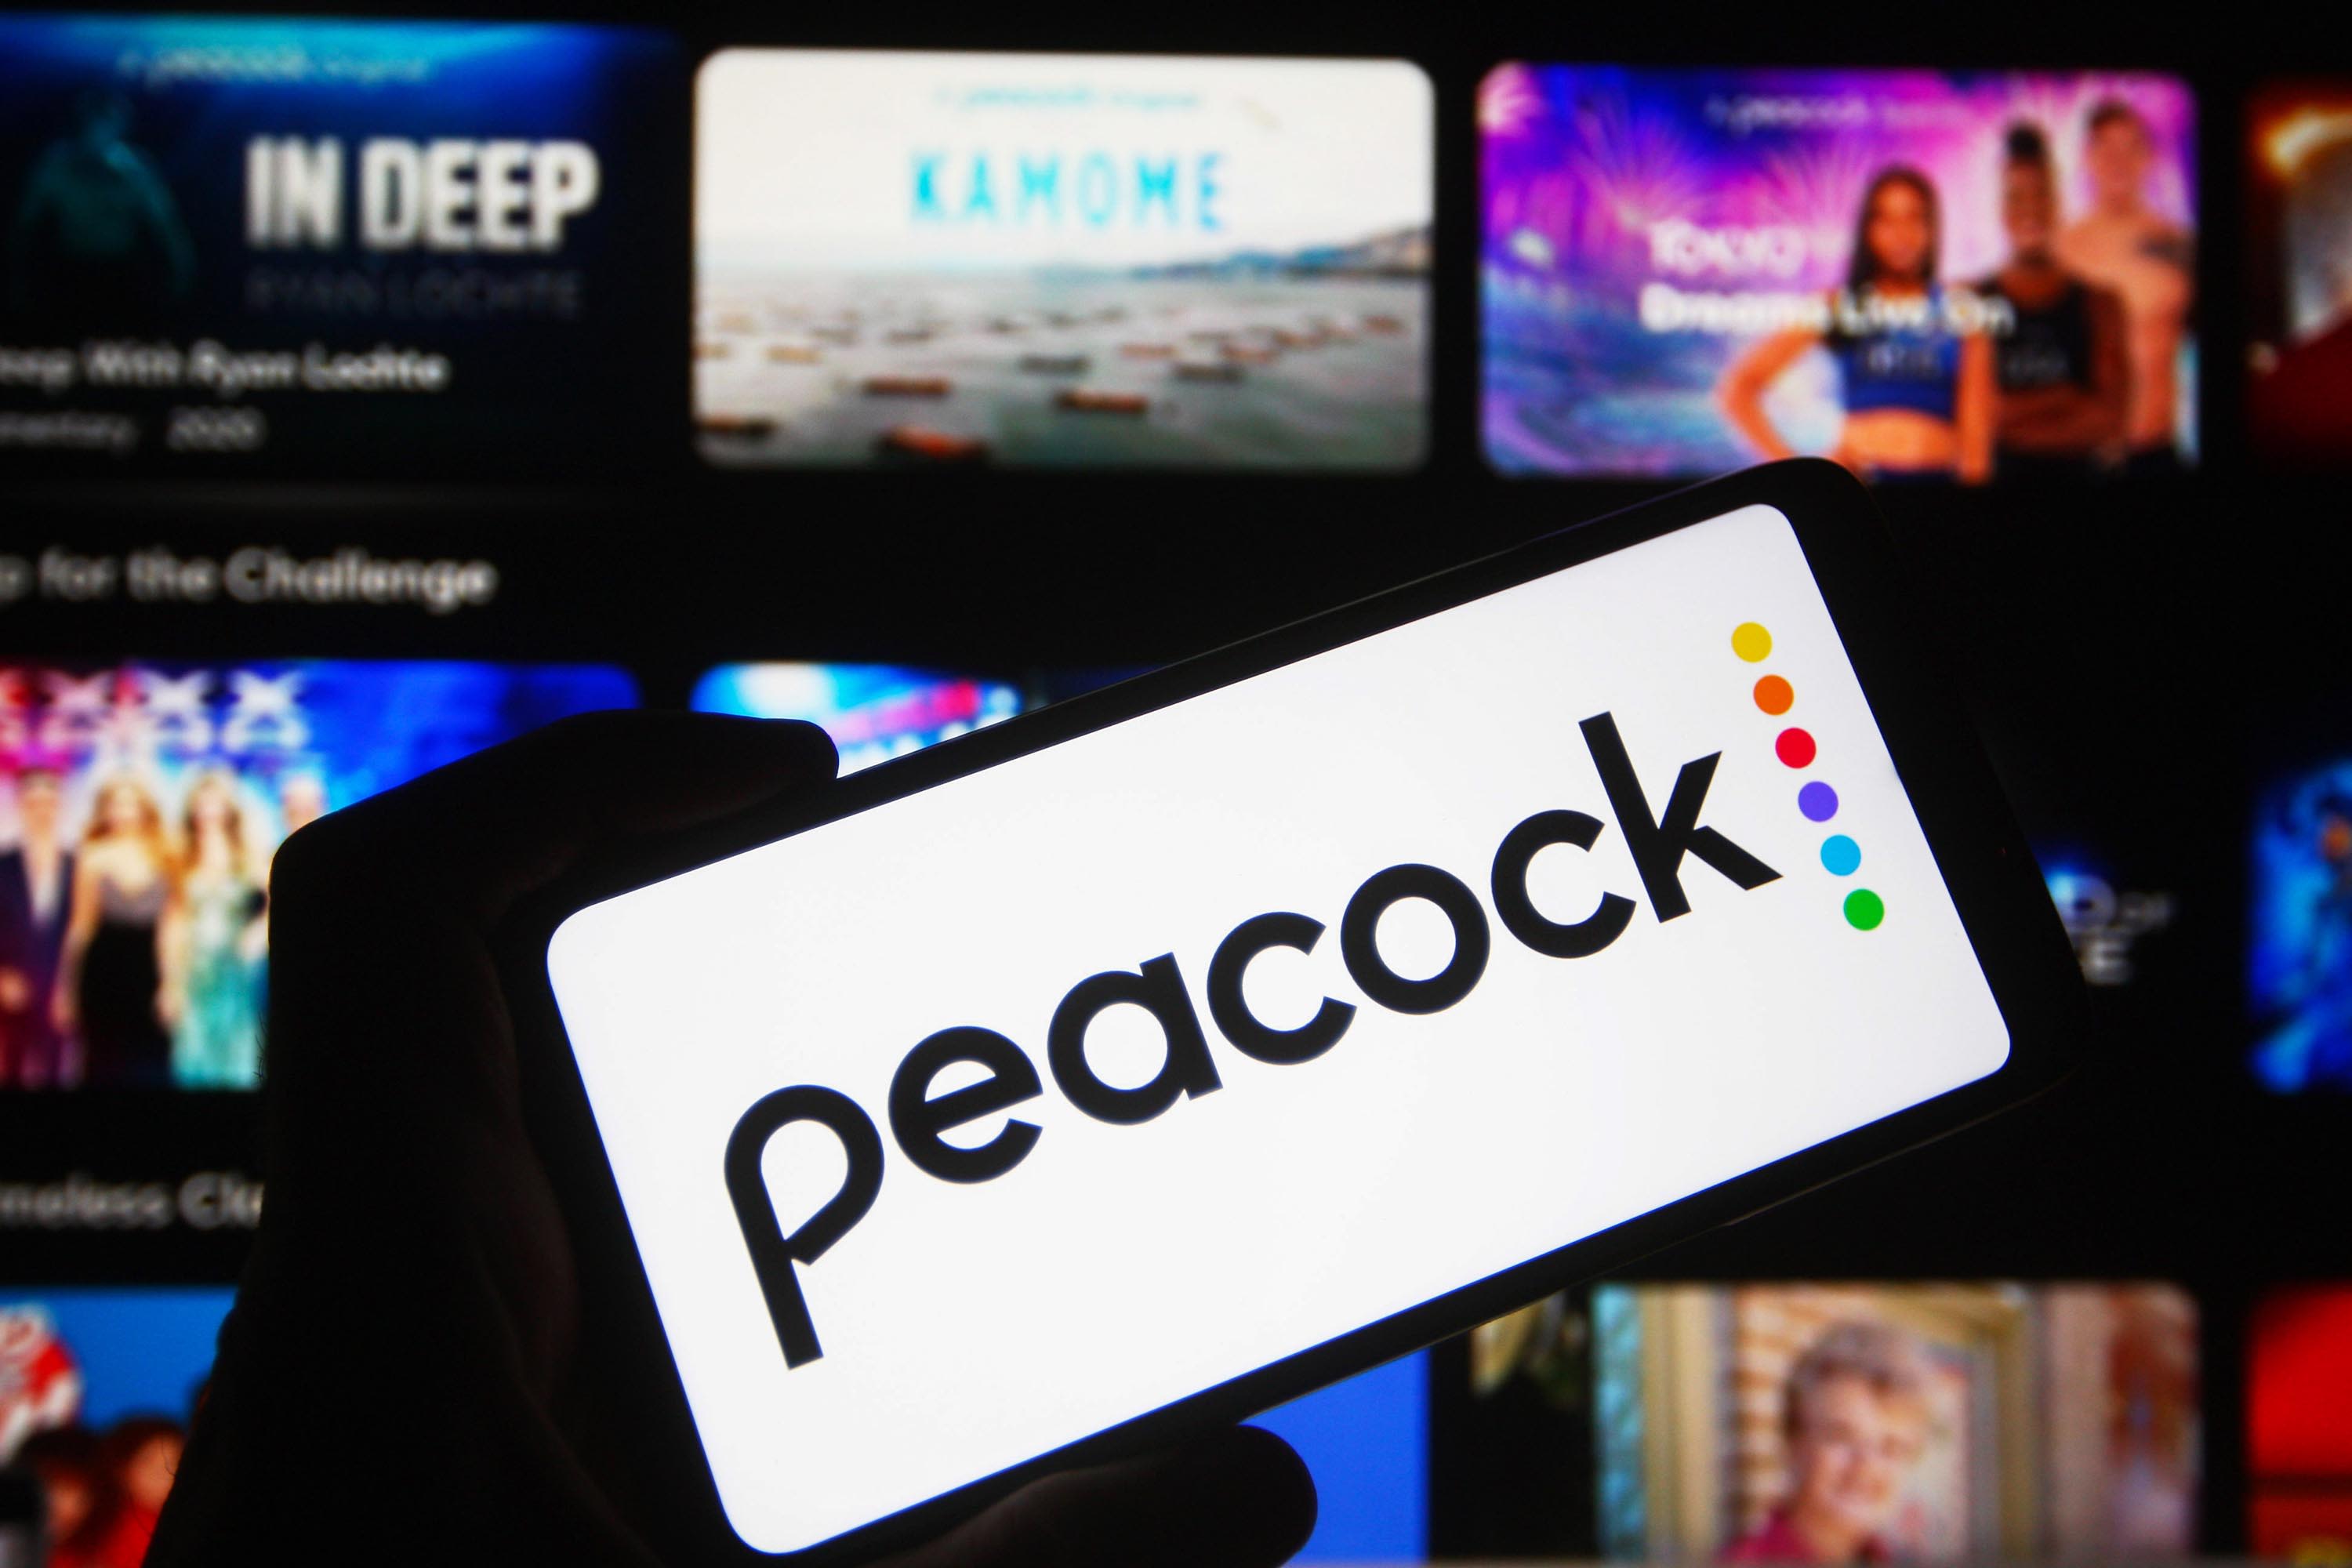 Report: Peacock Streaming Service to Reach 64.3 Million Viewers By